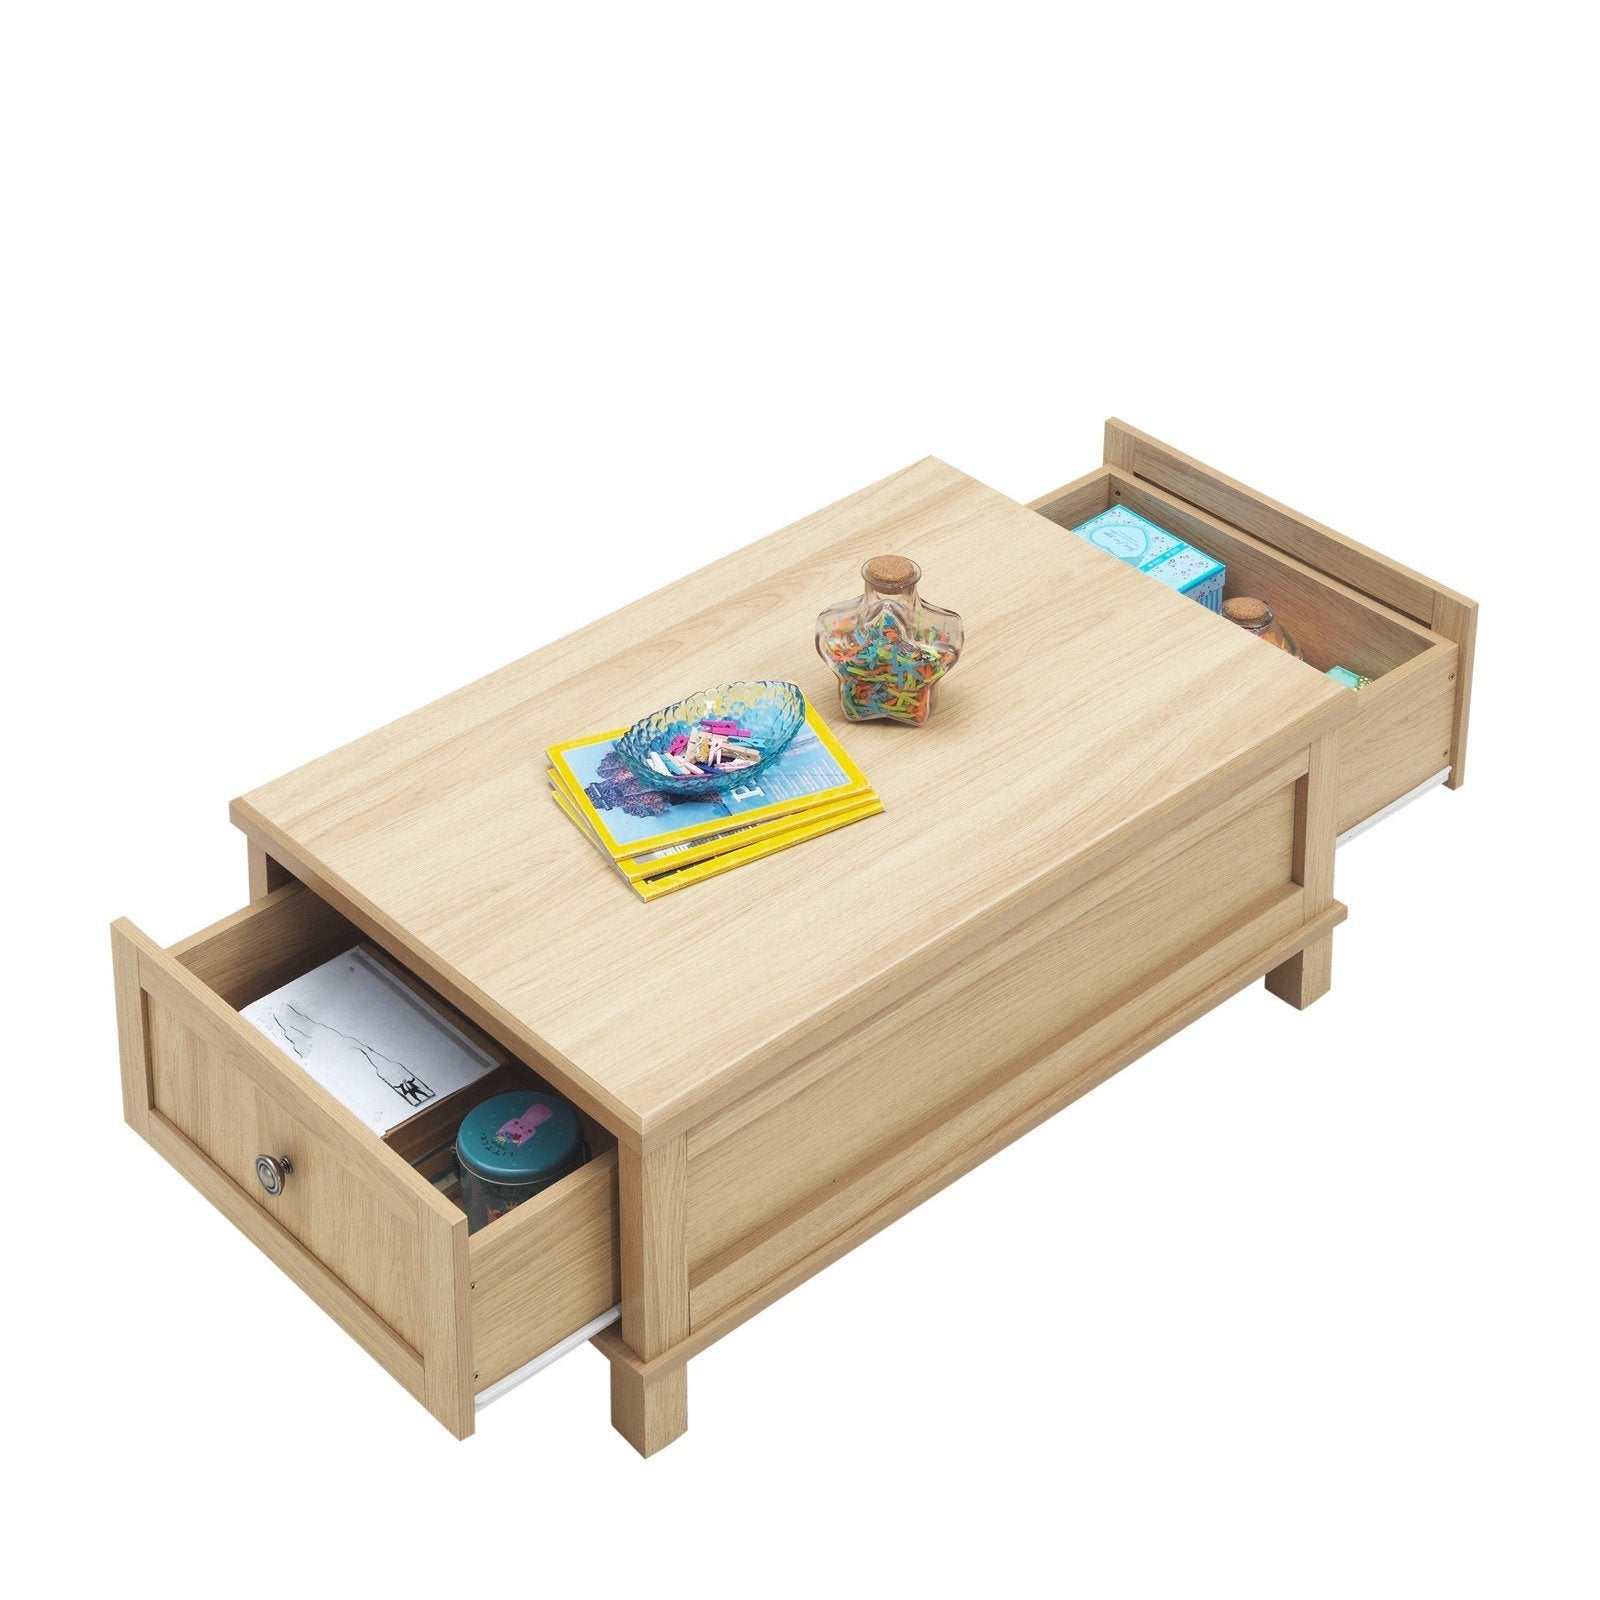 Sherwell Coffee Table Drawers allhomely